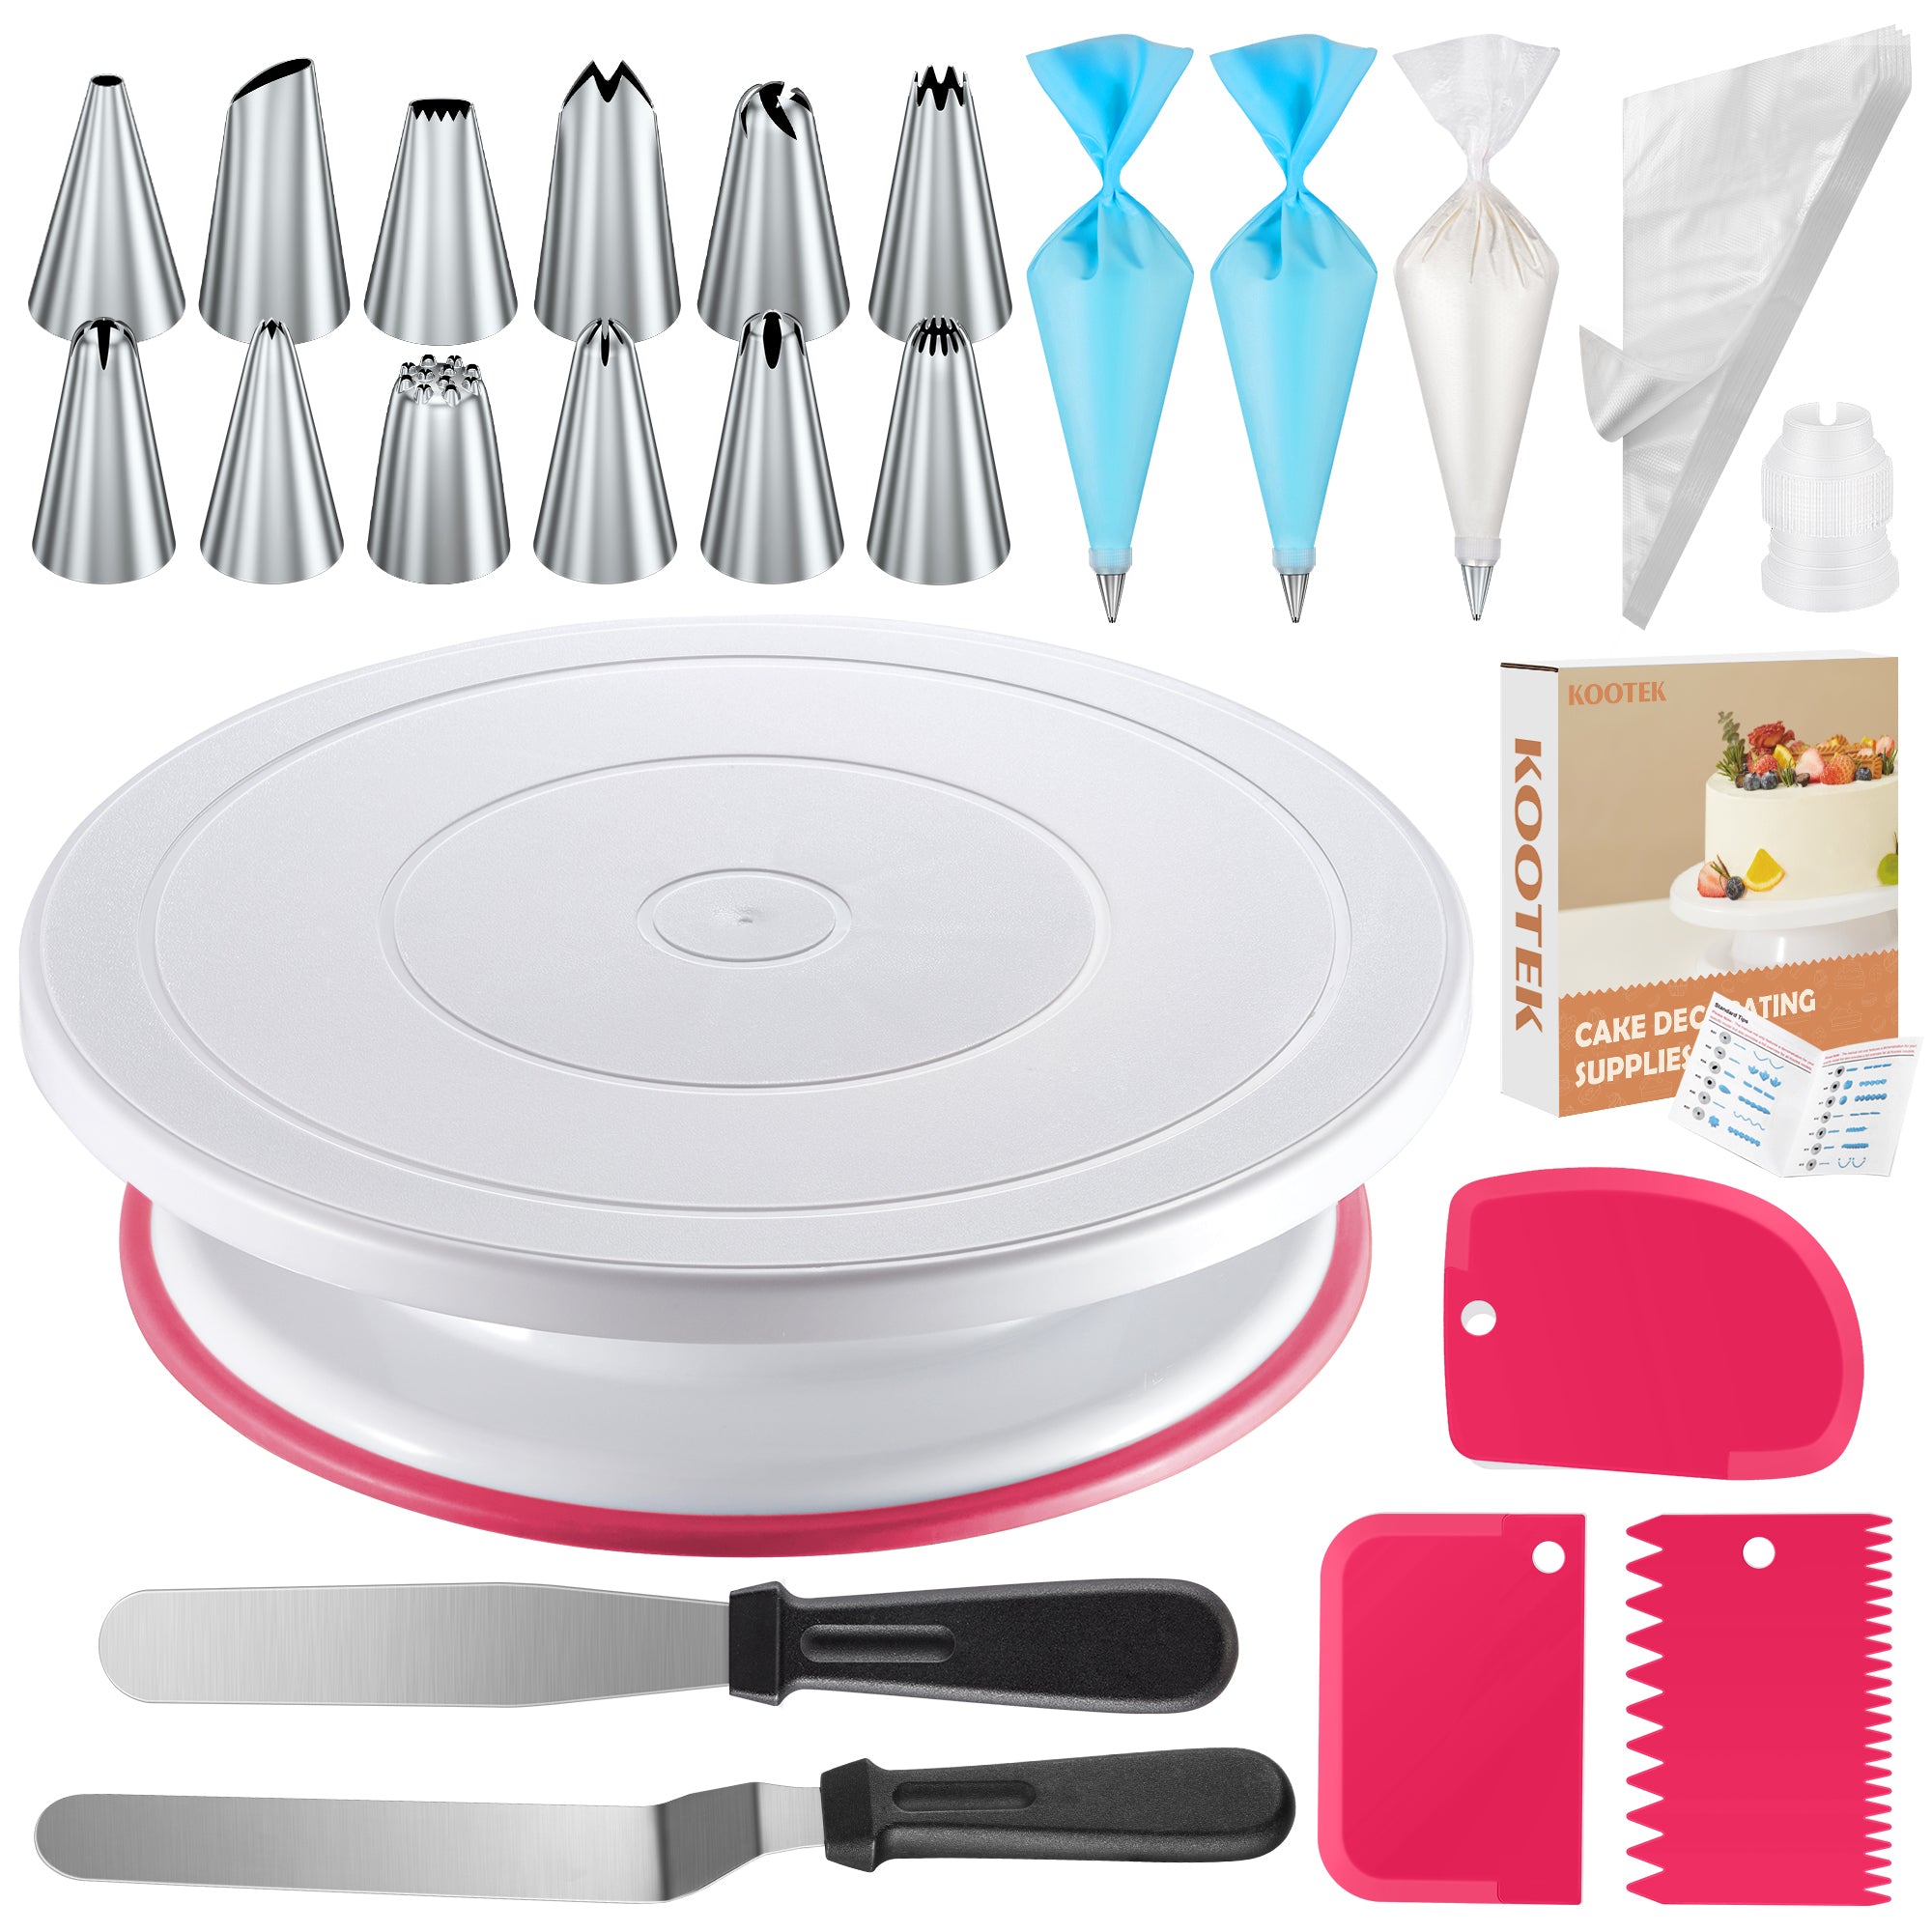 Kootek 71PCs Cake Decorating Supplies Kit, Cake Decorating Set with Cake Turntable, 12 Numbered Icing Piping Tips, 2 Spatulas, 3 Icing Comb Scraper, 50+2 Piping Bags, and 1 Coupler for Baking